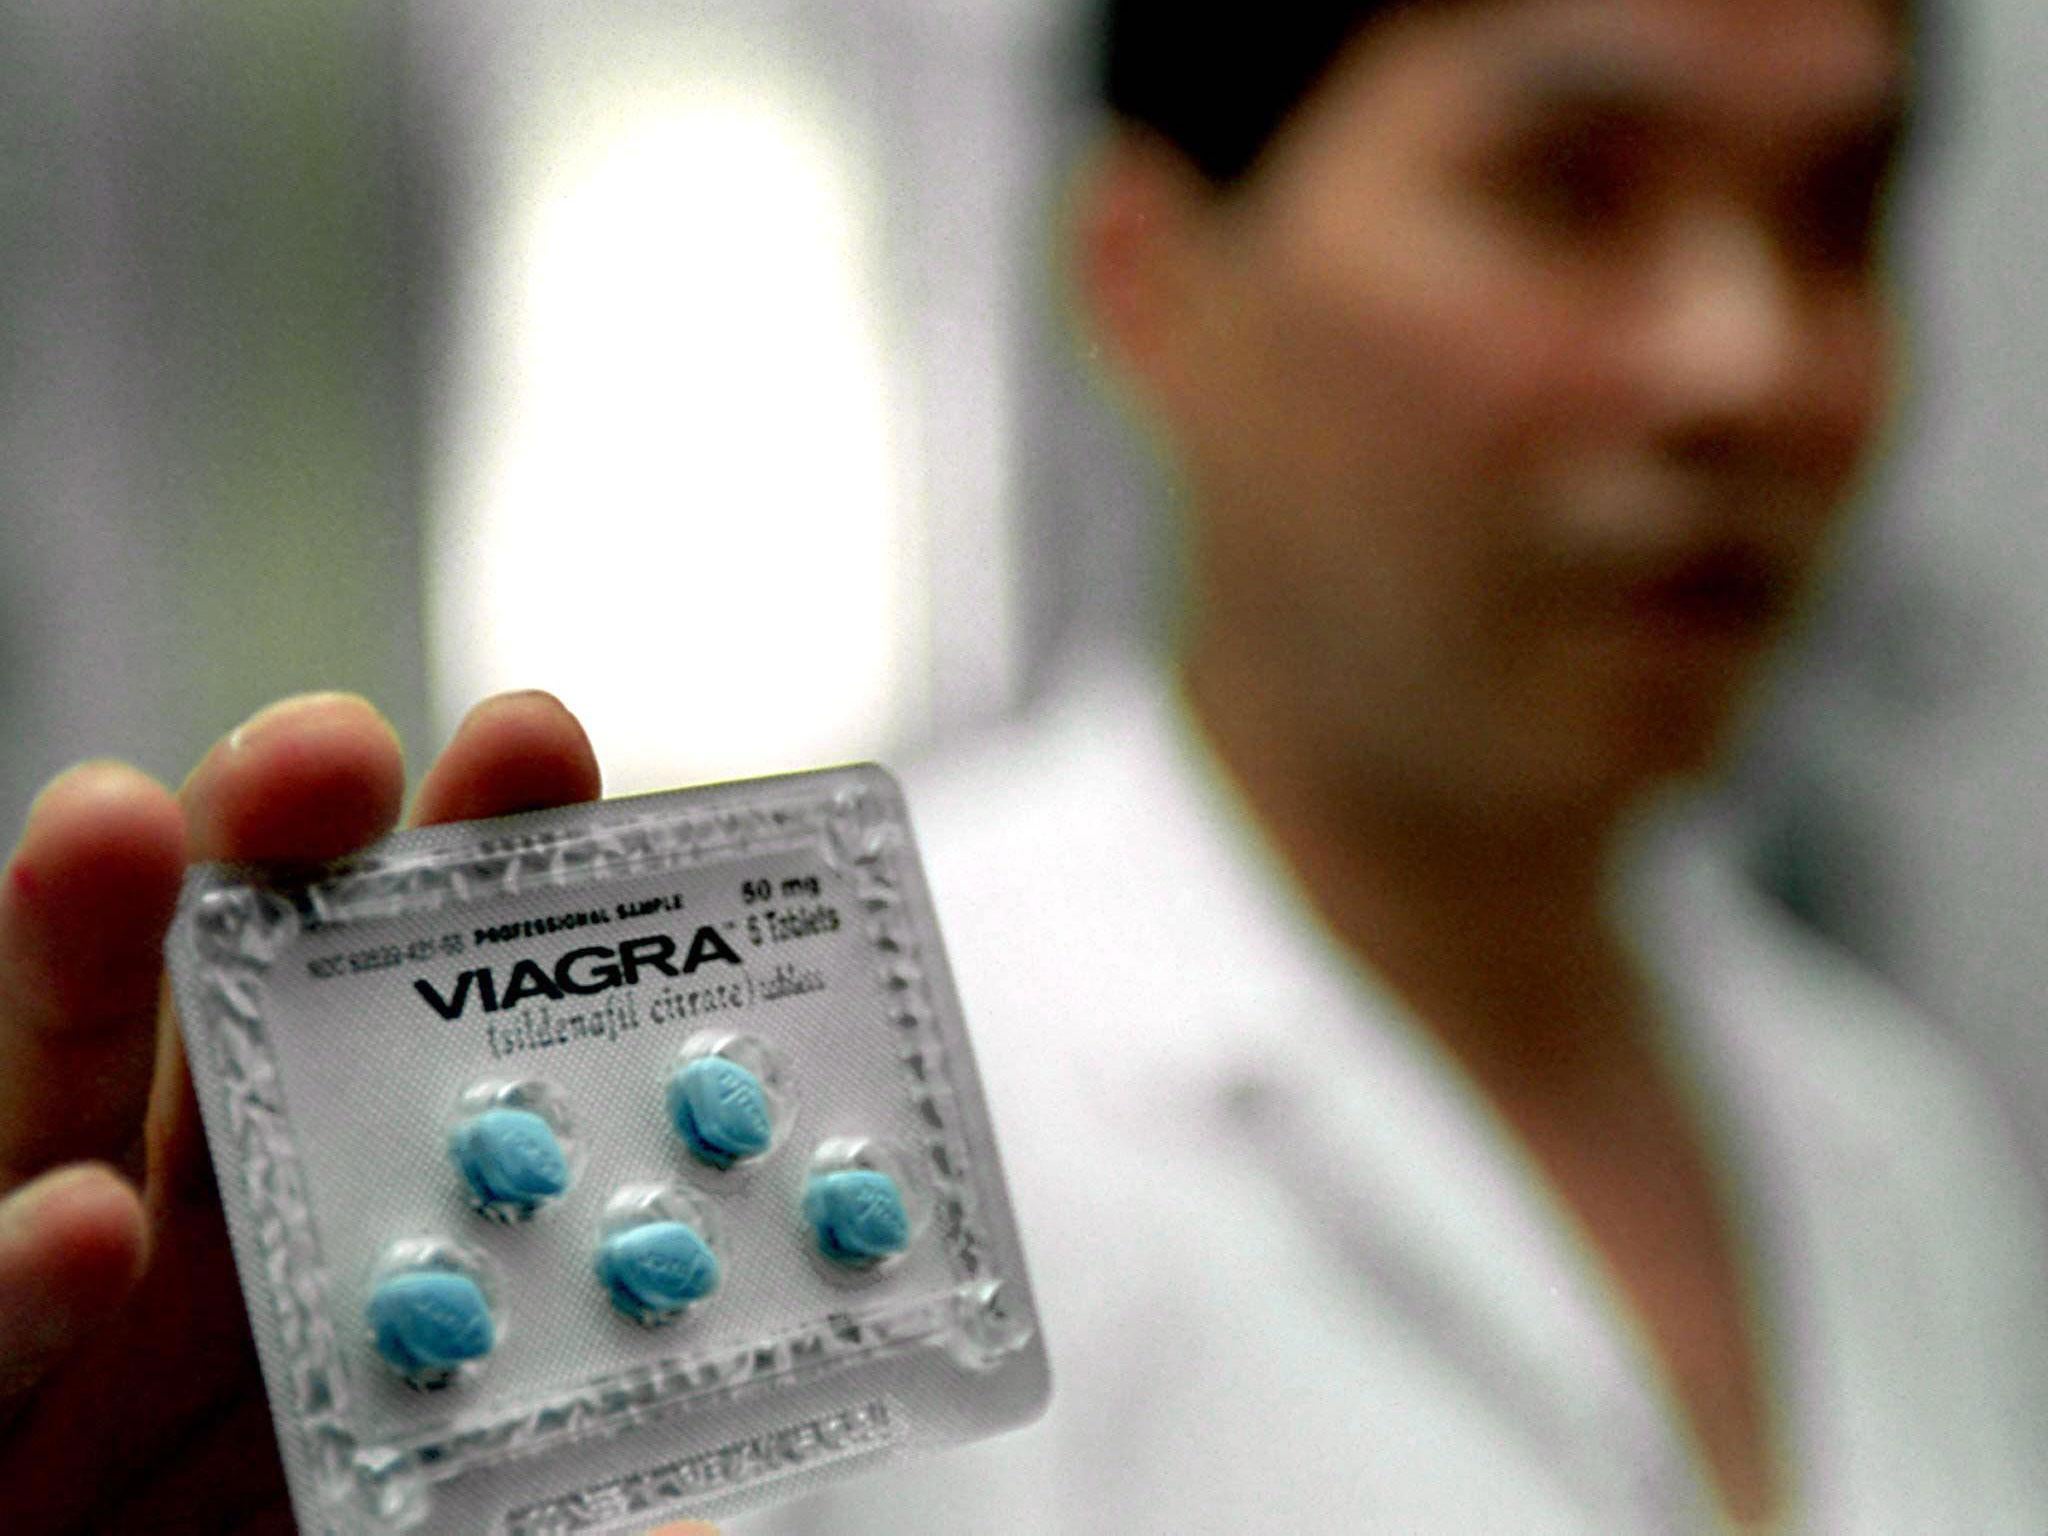 Viagra will be able to be sold over the counter